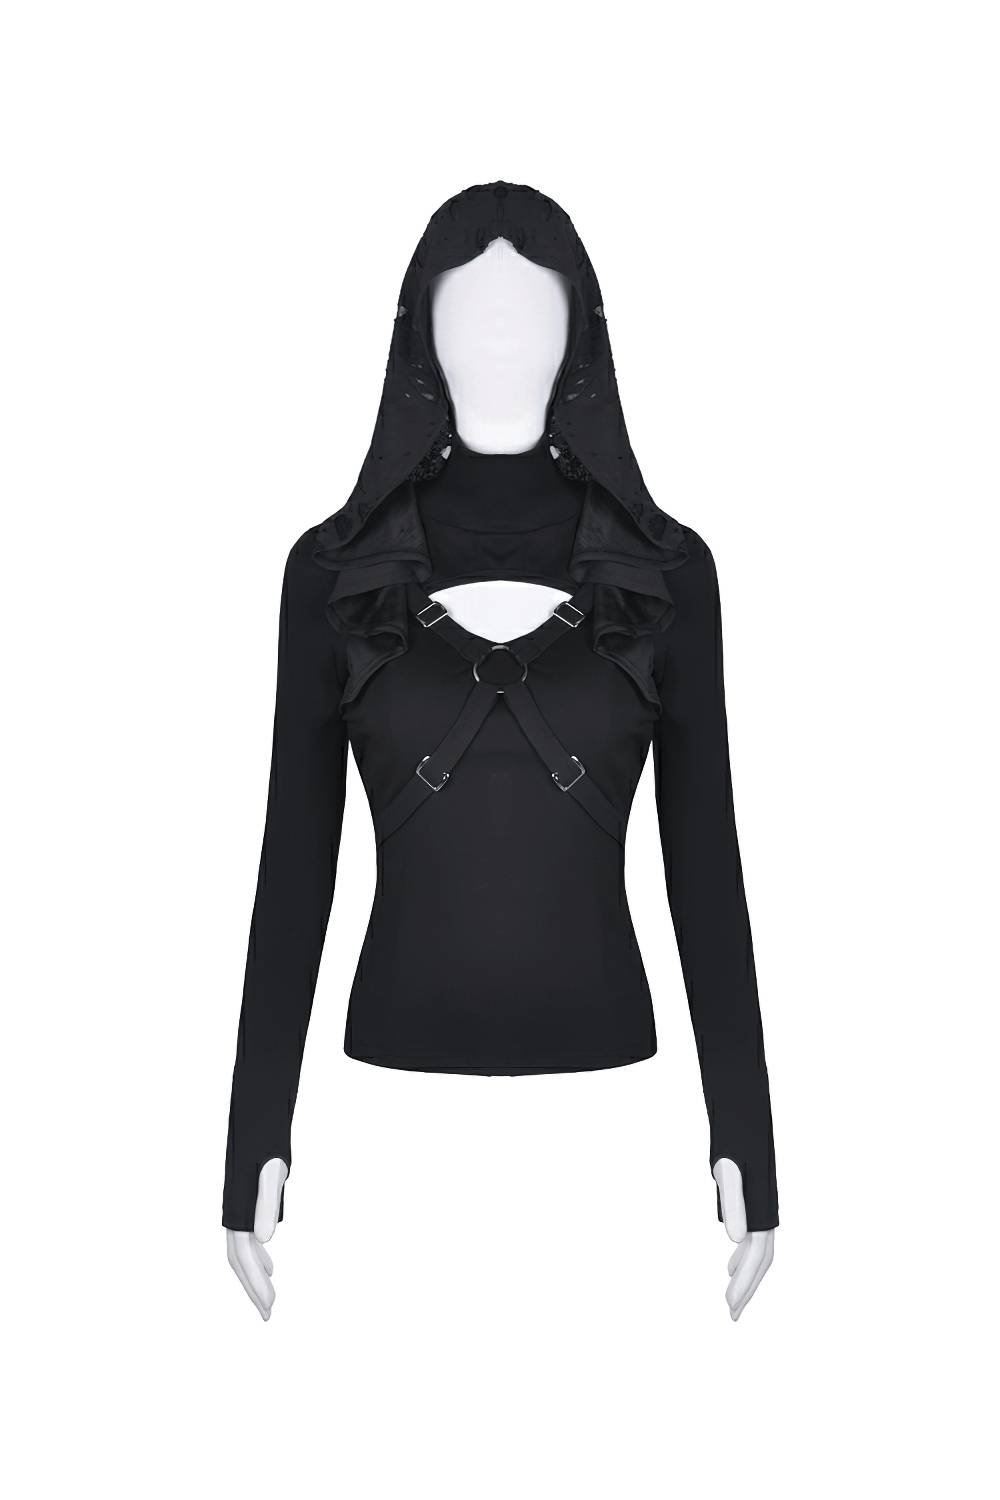 Edgy Black Hoodie with Metal Accents And Shredded Hood